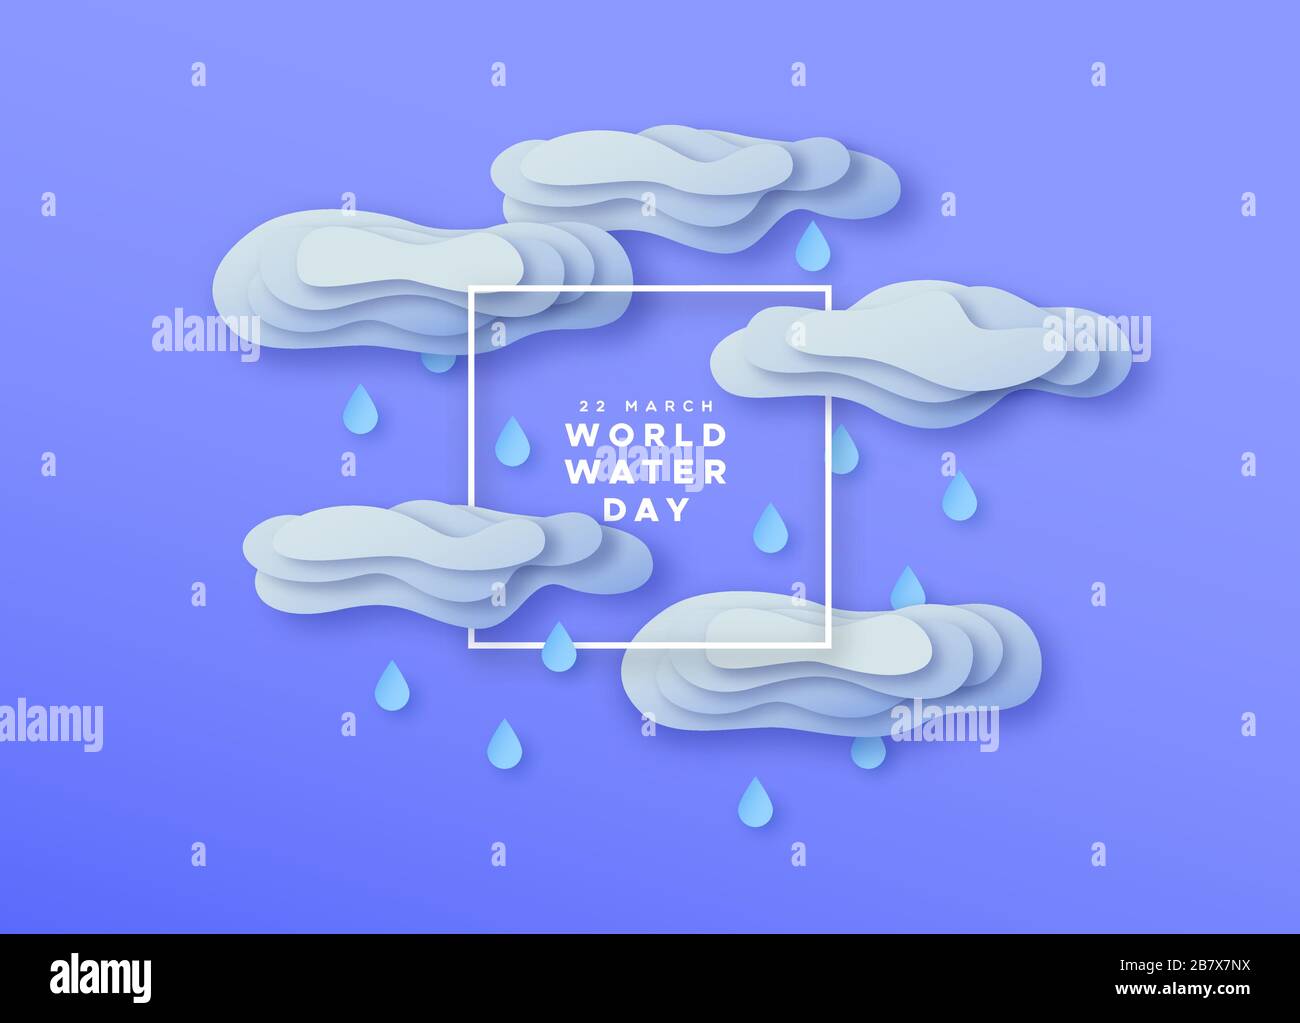 World water Day paper cut illustration of 3d layered cutout rain clouds for climate change or raining weather concept. Environment help papercut campa Stock Vector